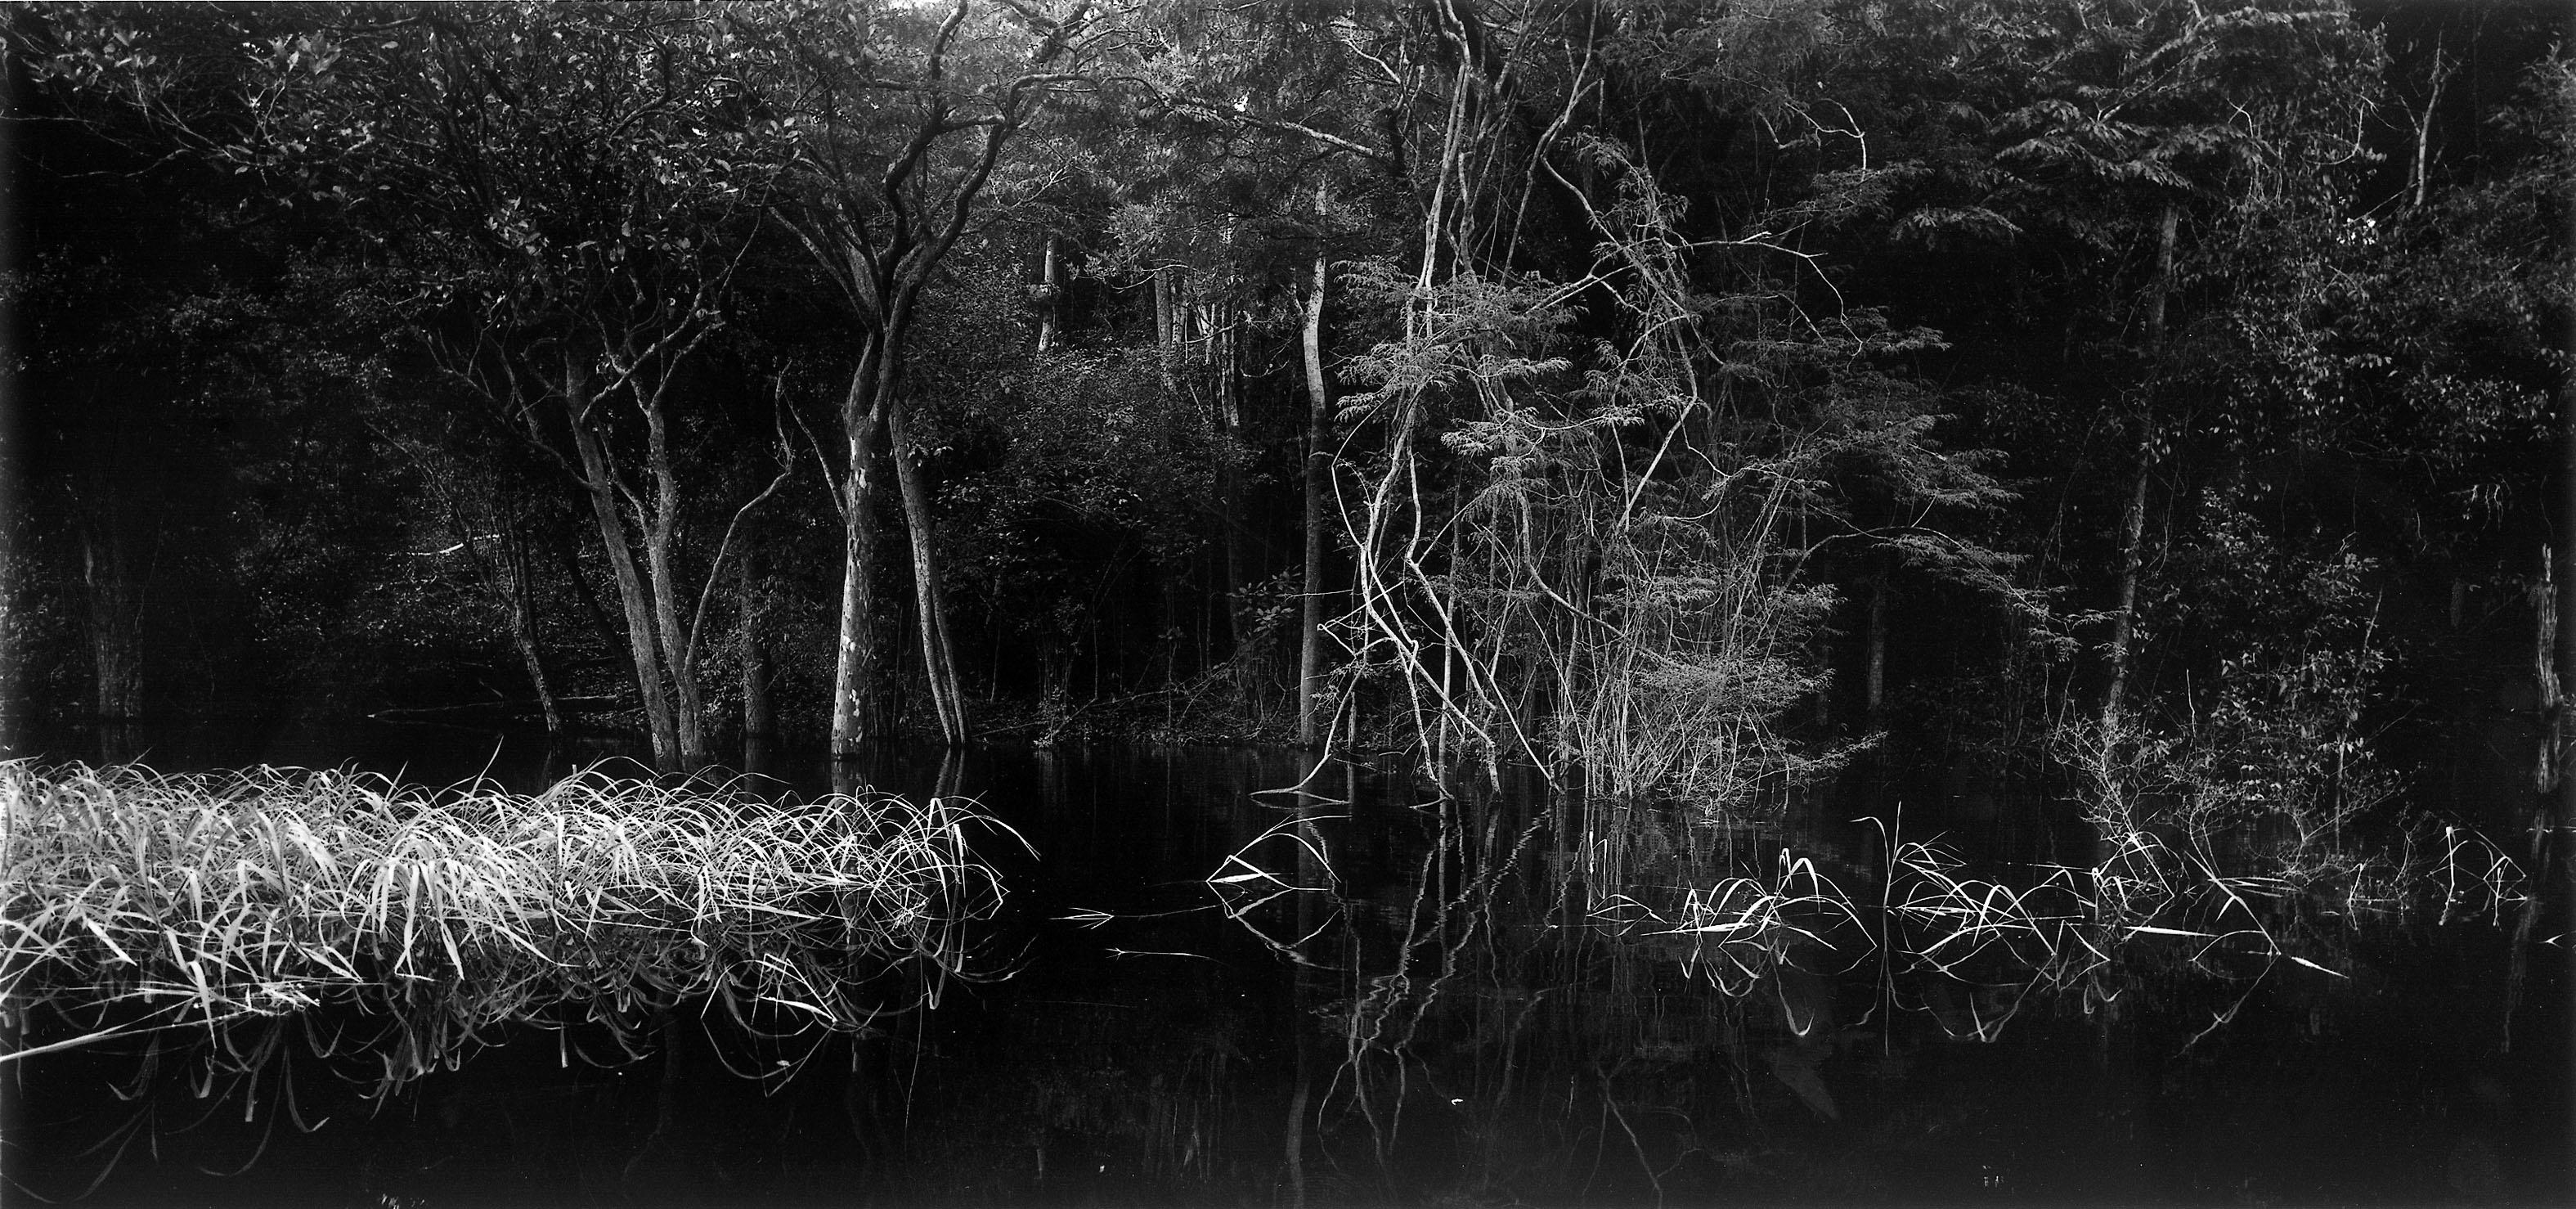 Balthasar BURKHARD (1944–2010, Switzerland)
Rio Negro 02, 2002
Silver gelatin print on Baryta paper, artist's iron frame, museum glass
Sheet 125 x 250 cm (49 1/4 x 98 3/8 in.)
Frame 127 x 252 x 4 cm (50 x 99 1/4 x 1 5/8 in.)
From a sold out edition